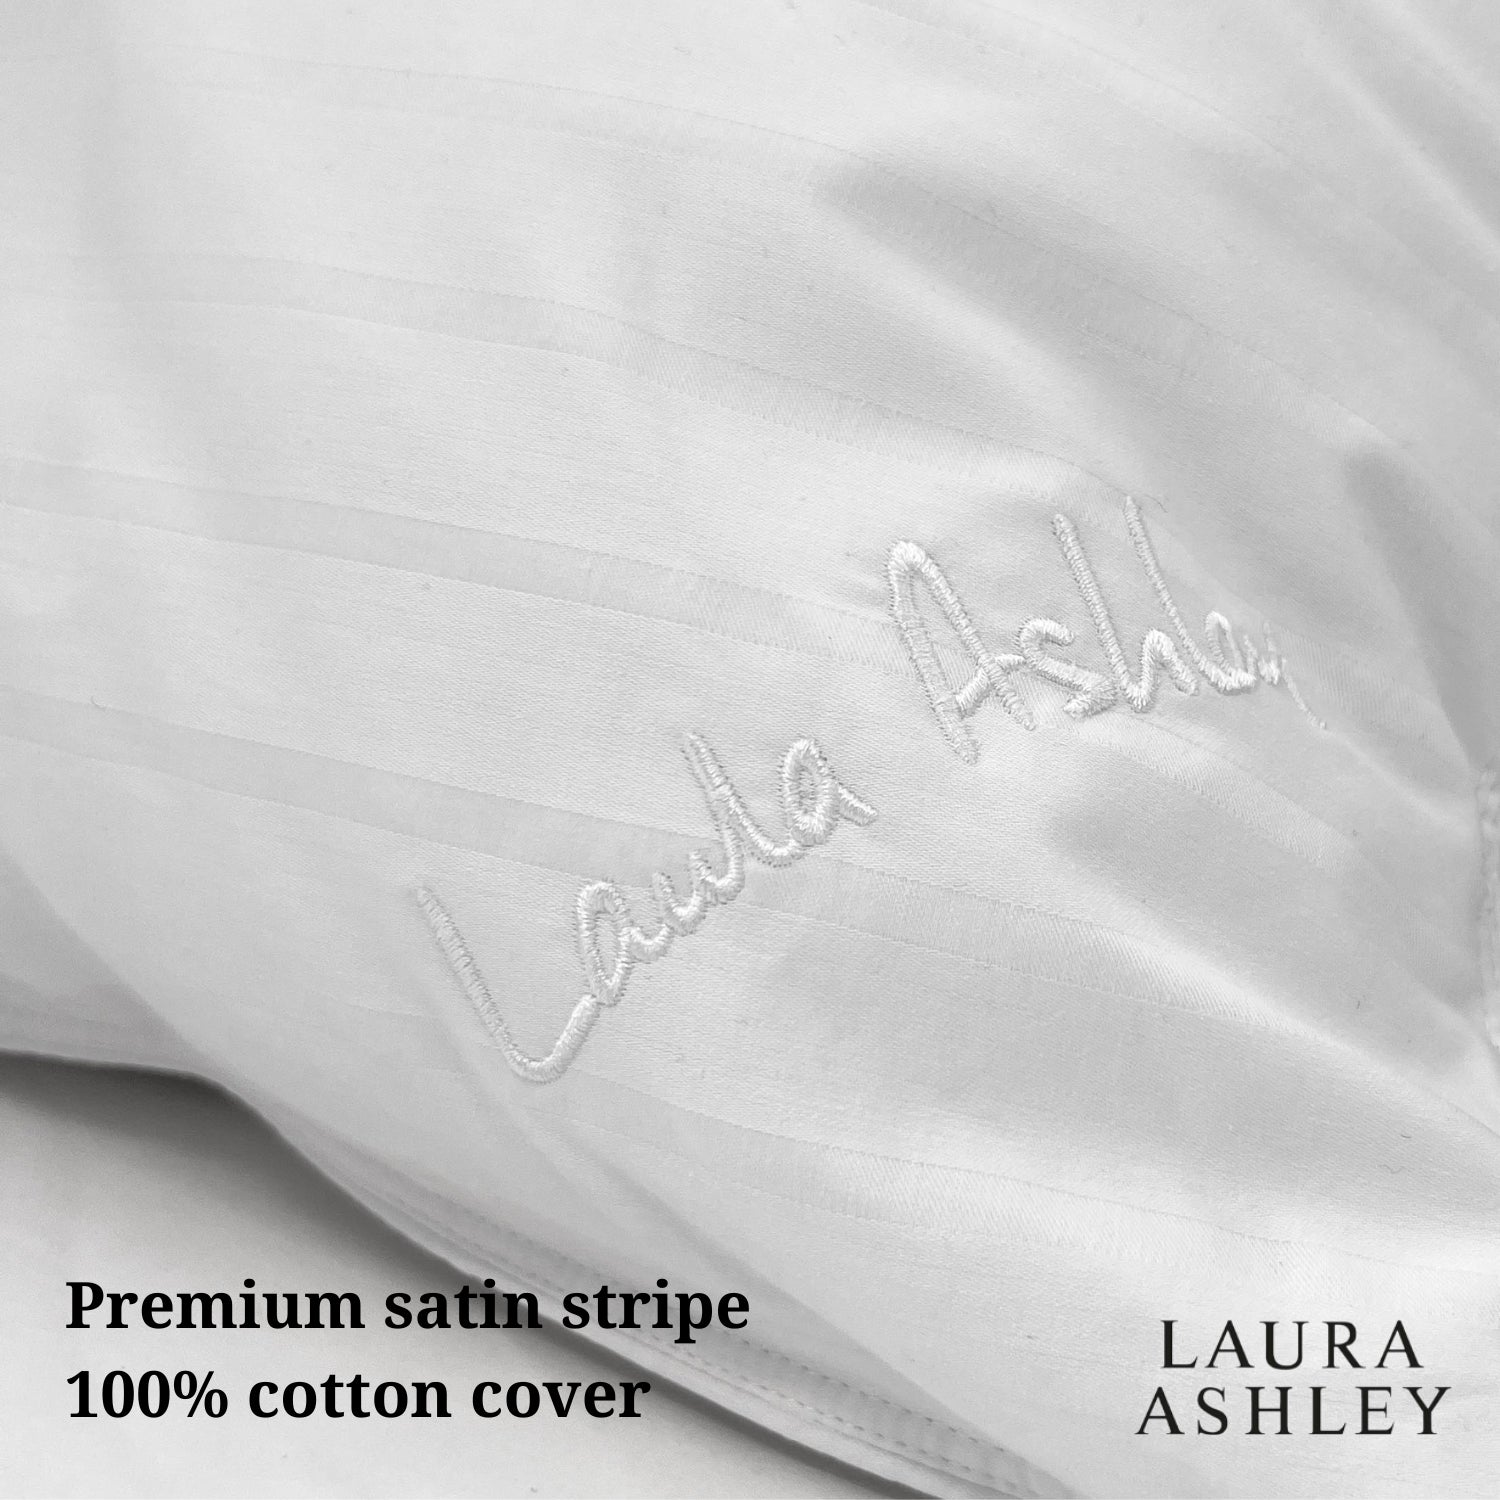 Laura Ashley Supreme Comfort Duo Pillow with luxury satin cover